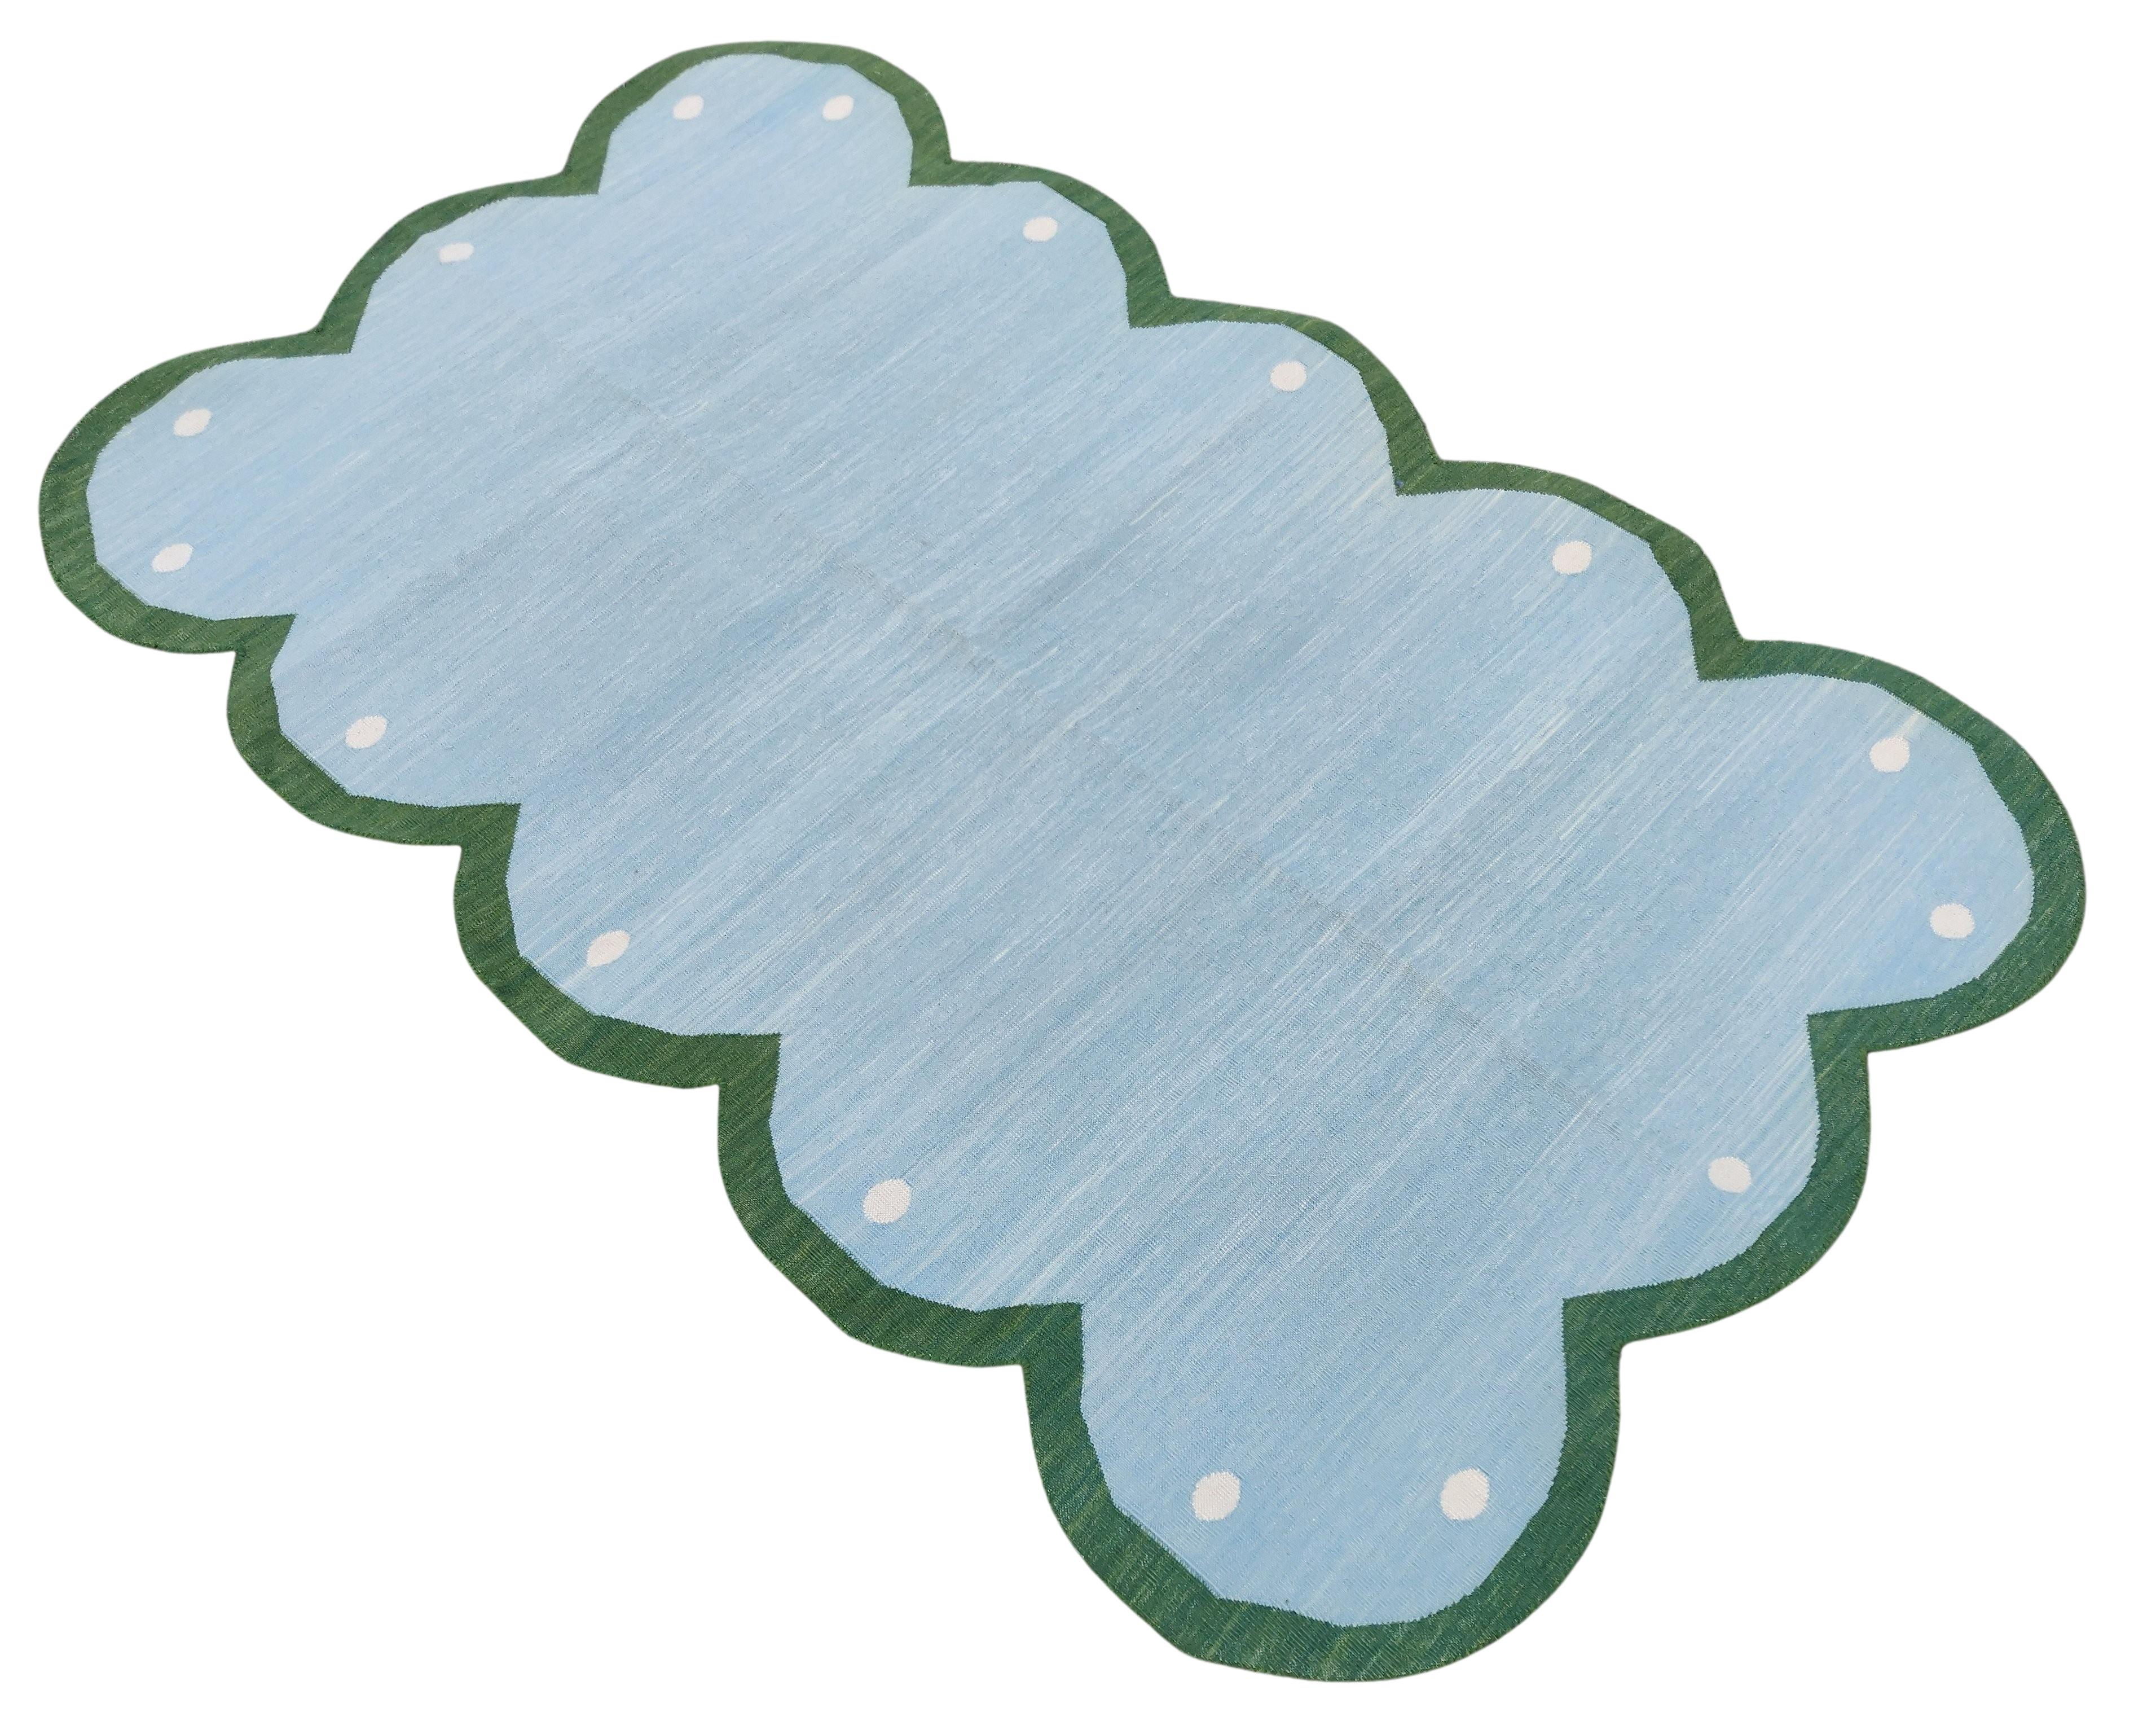 Cotton Vegetable Dyed Sky Blue & Forest Green Four Sided Scalloped Rug-3'x5' (Scallops runs on all 4 Sides)
These special flat-weave dhurries are hand-woven with 15 ply 100% cotton yarn. Due to the special manufacturing techniques used to create our